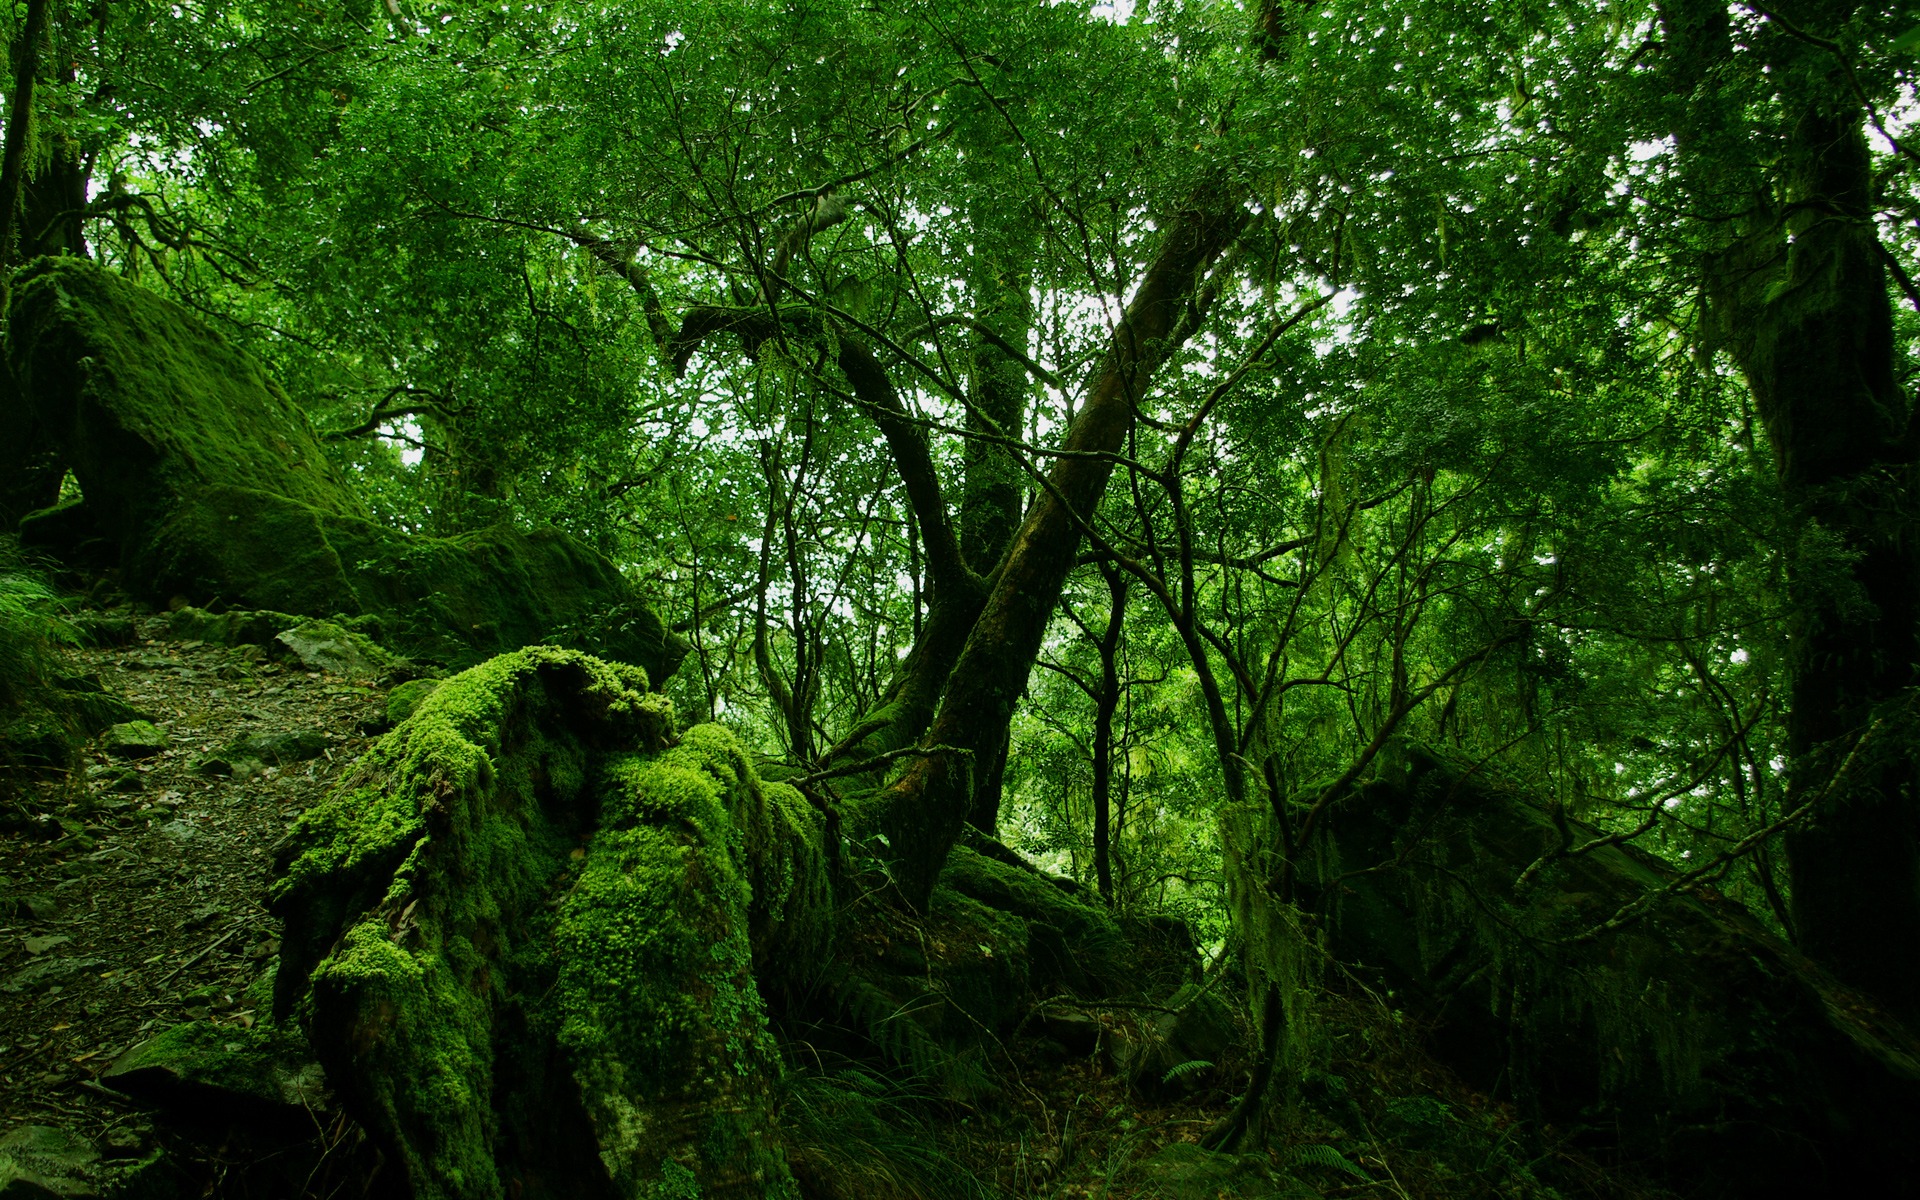 Wallpaper green nature wallpapers for free download about (3,860 ...